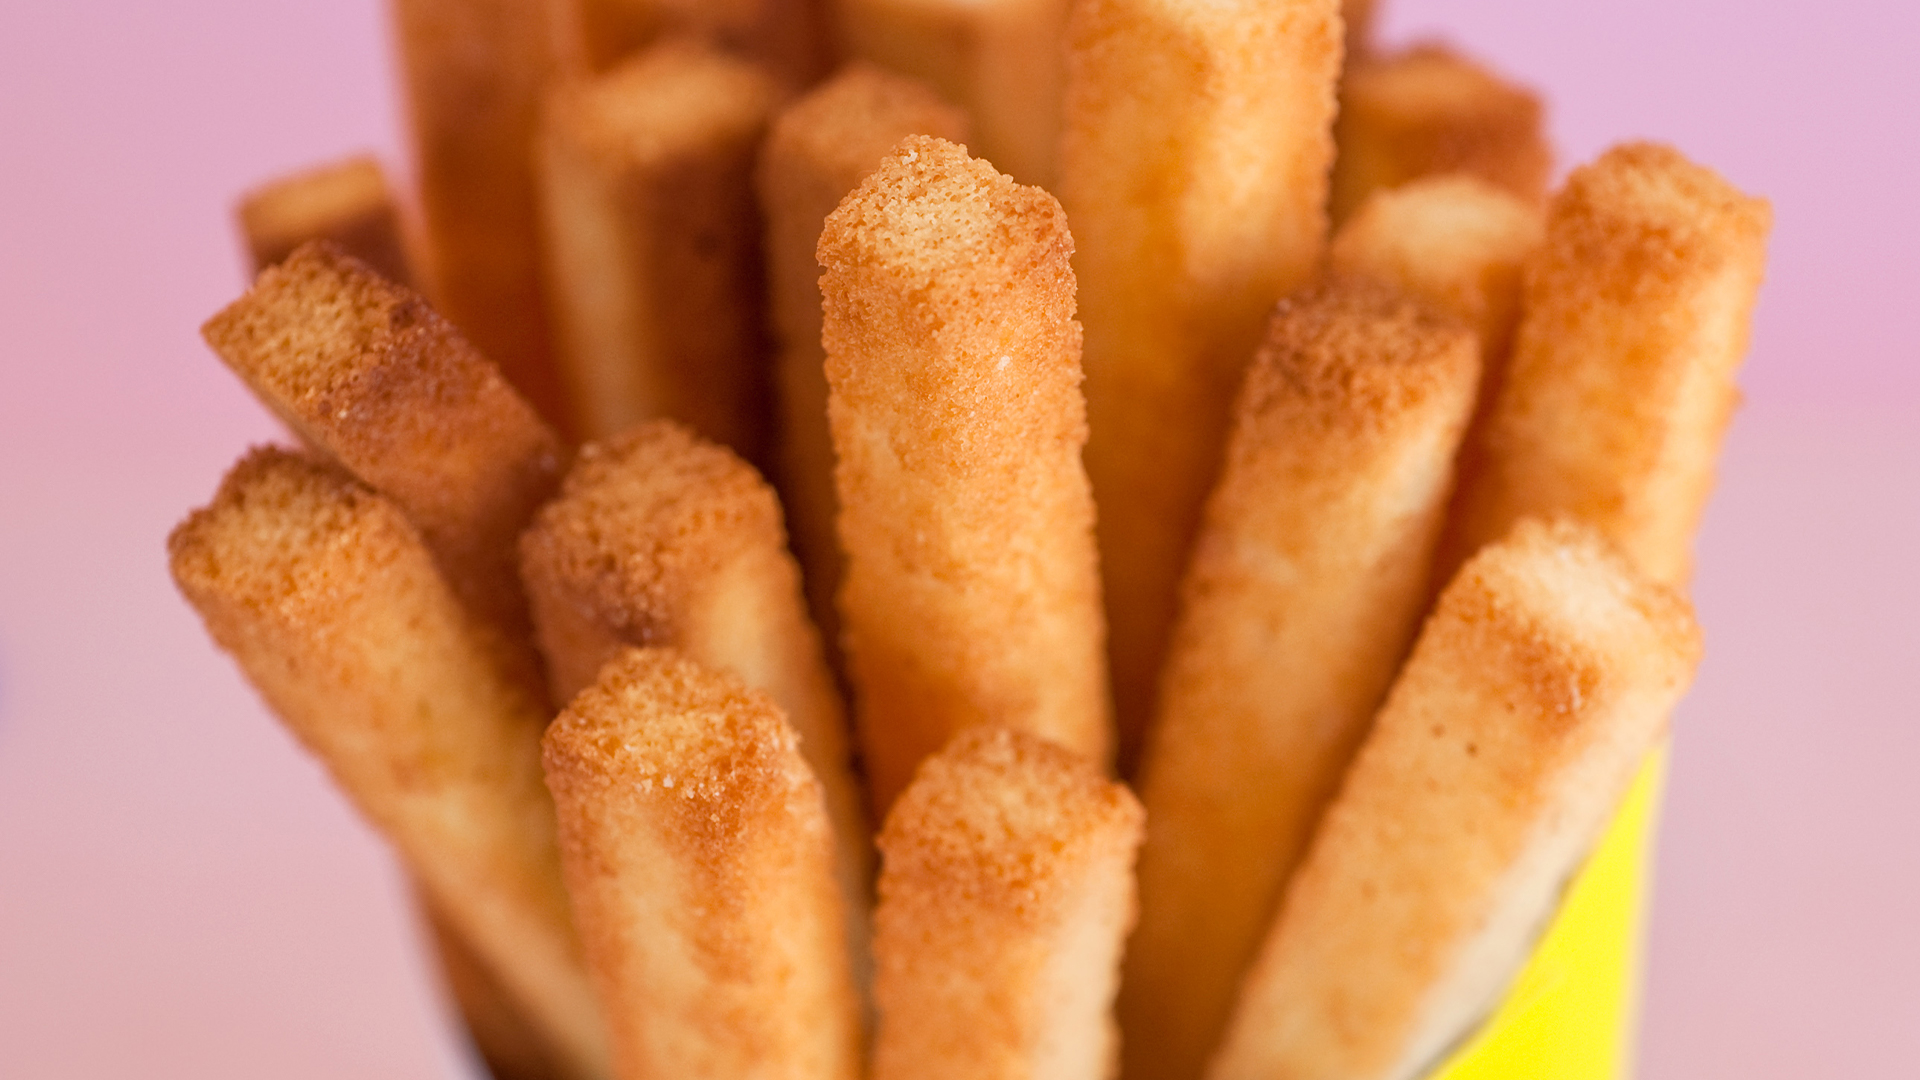 Pound cake fries with raspberry catsup